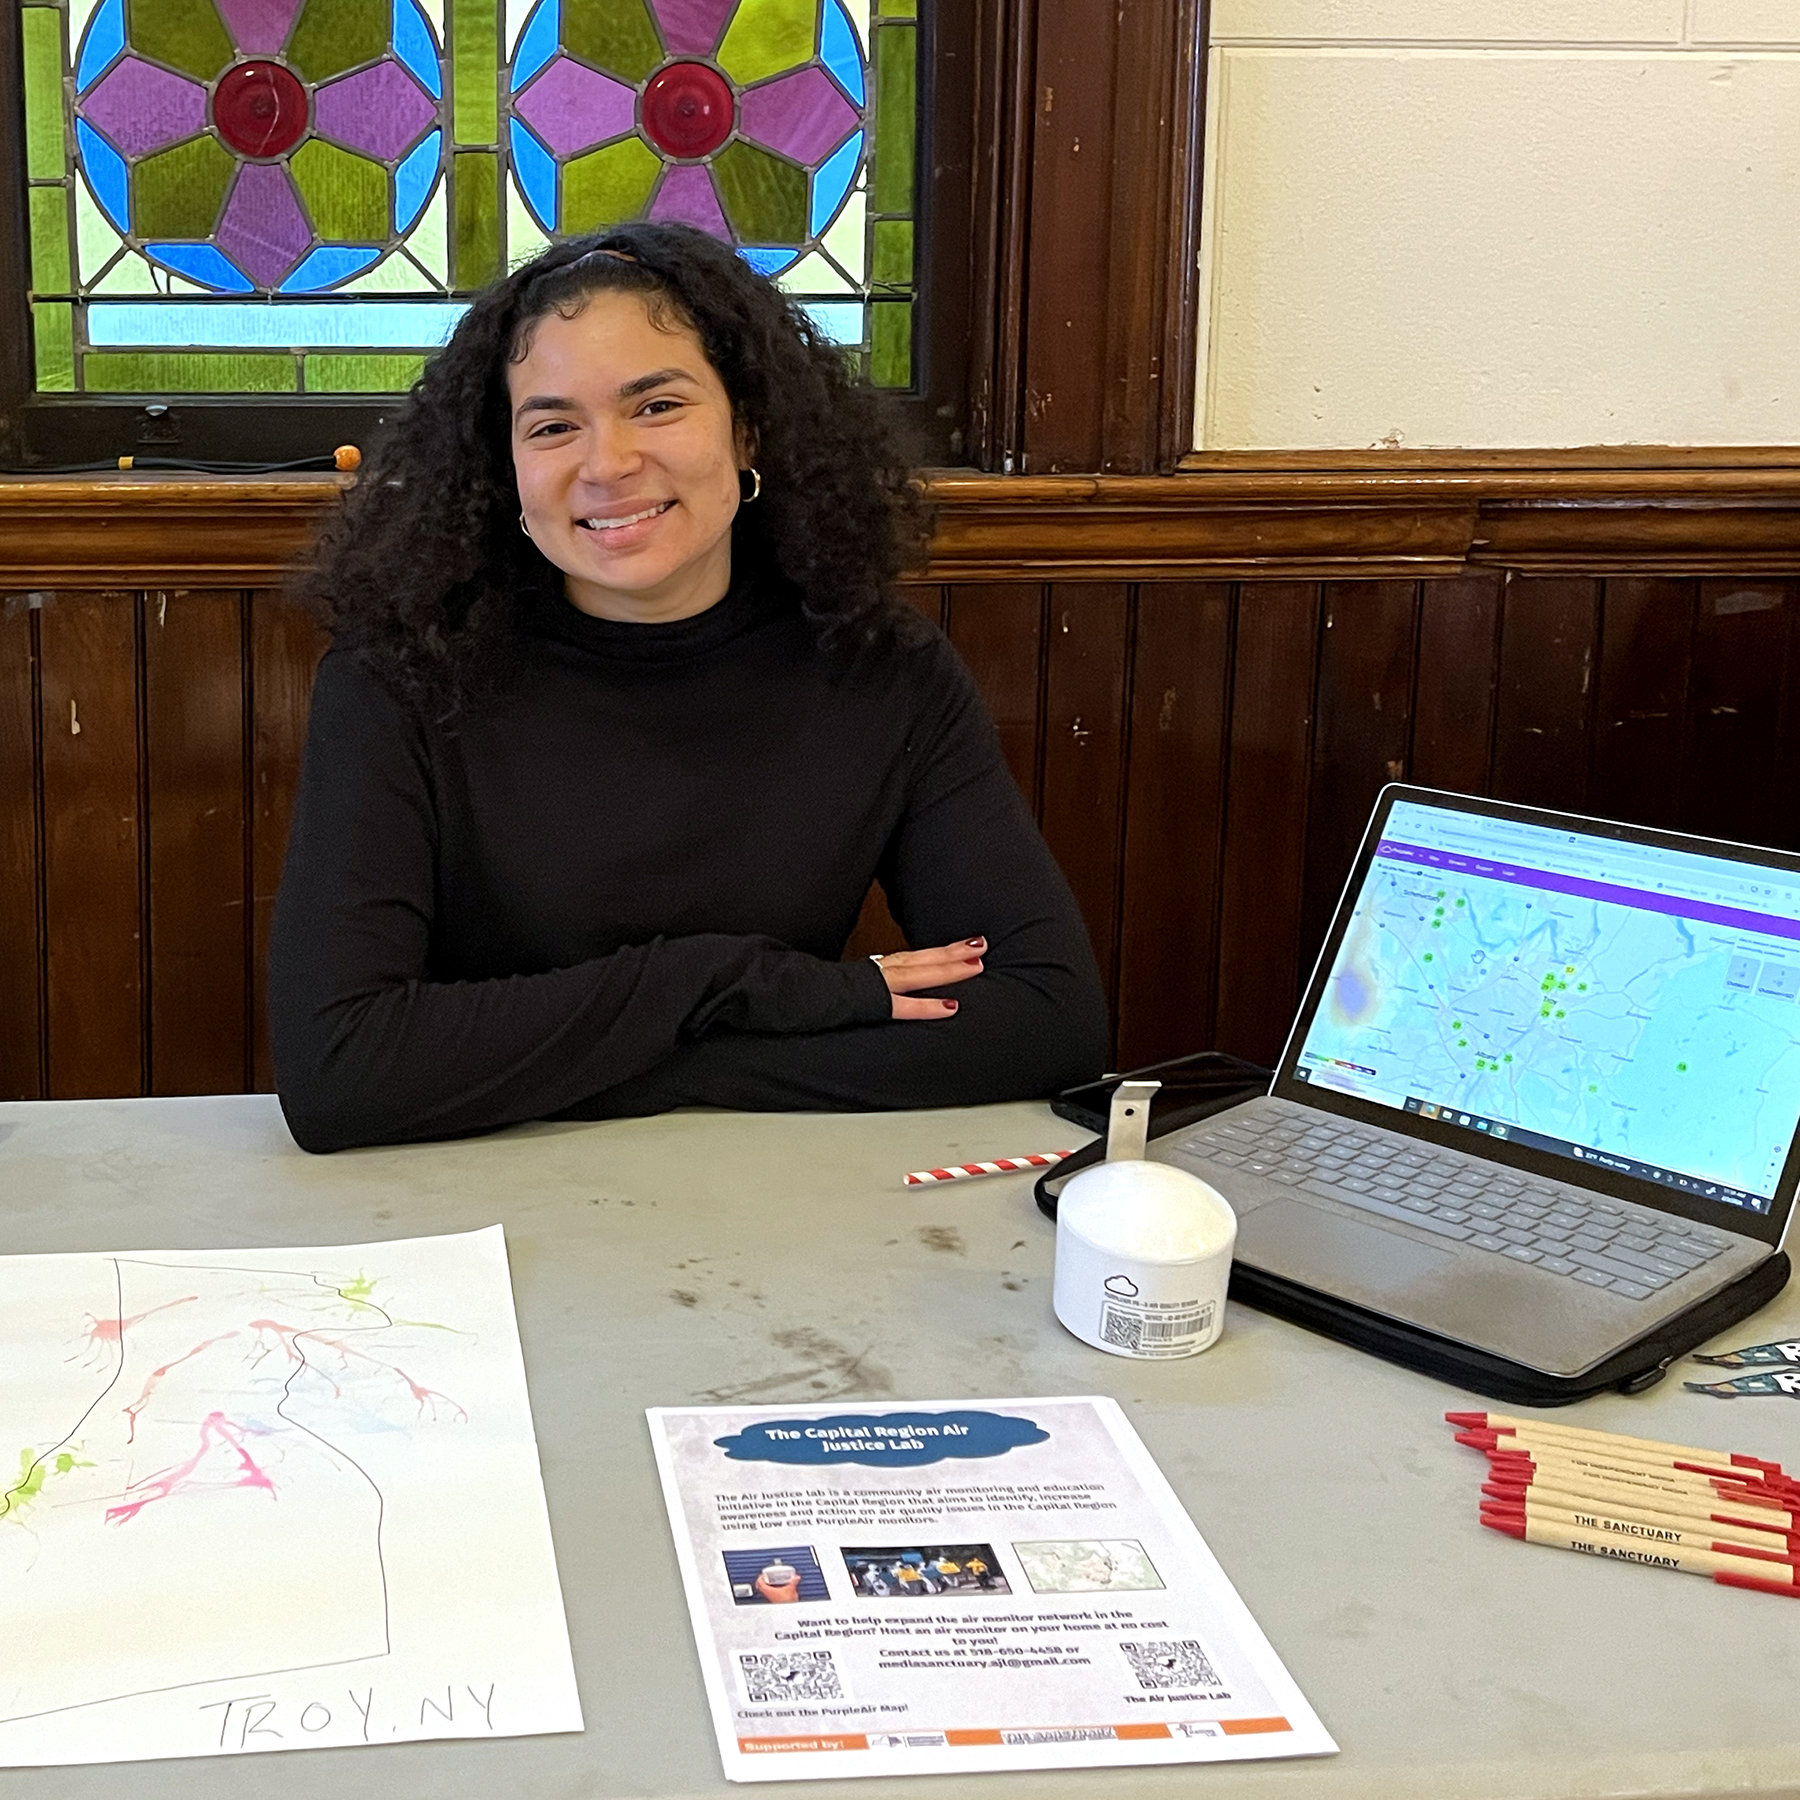 a photo of A’Livija Mullins-Richard sitting at a table to promote the Air Justice Lab using a laptop showing the readings of local air monitors